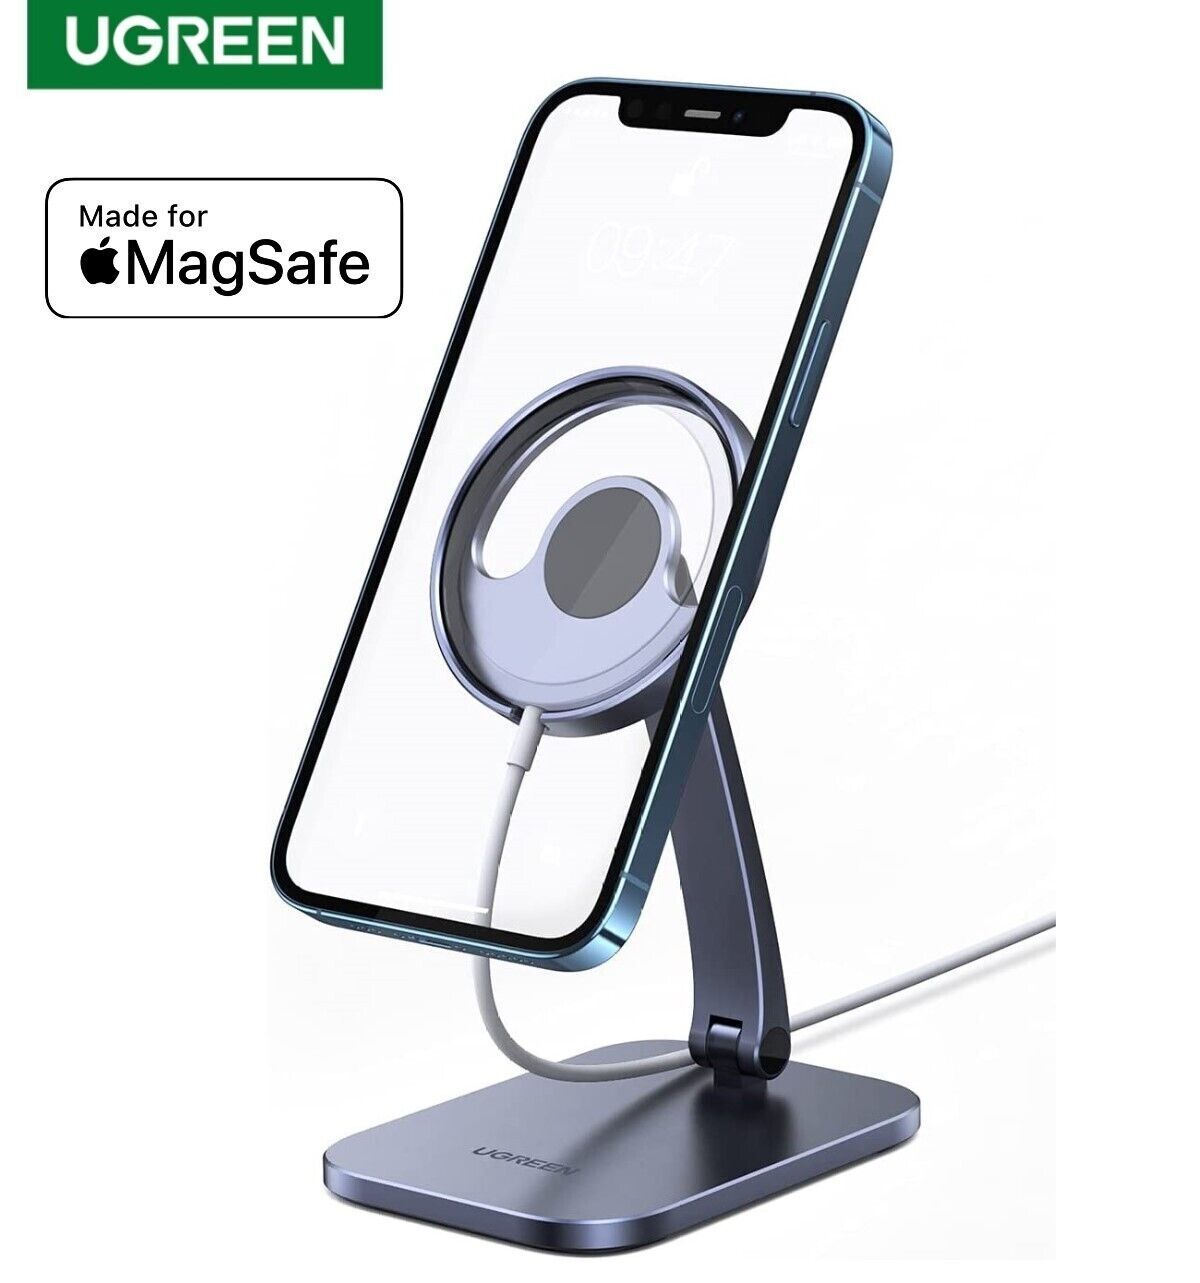 Ugreen Phone Stand for Magsafe Charger Desk Adjustable and